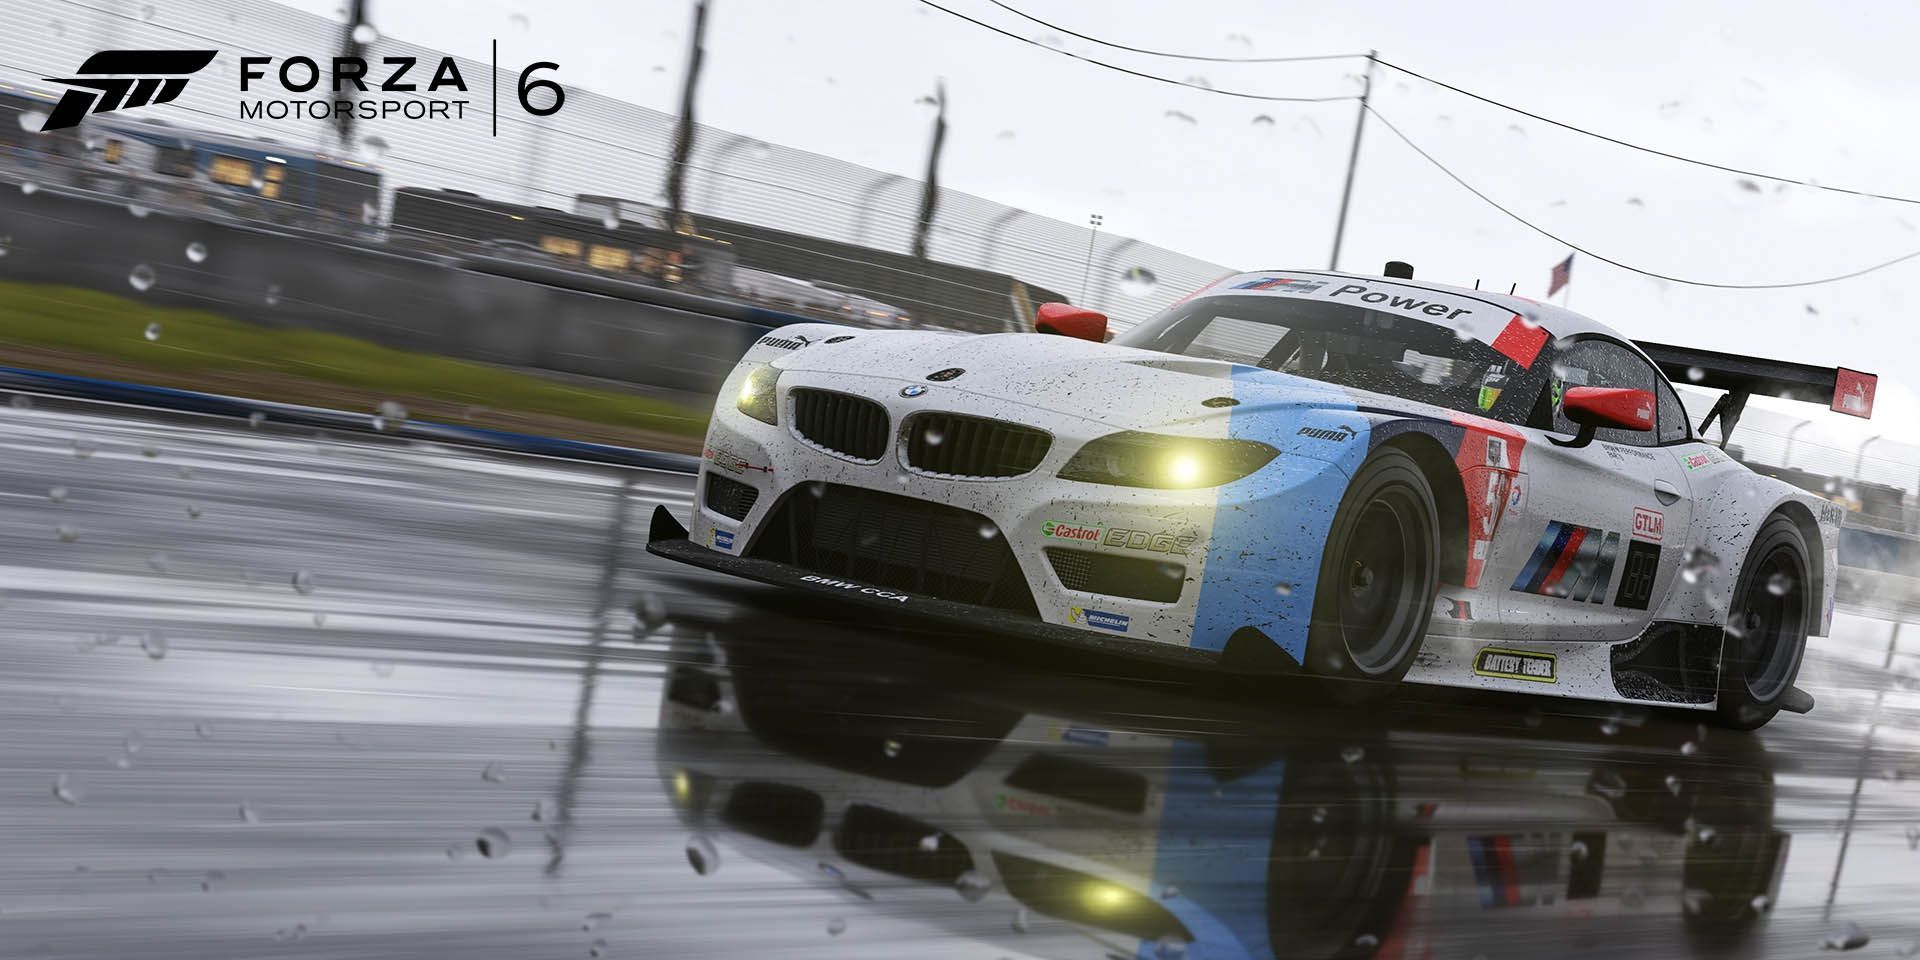 Forza 6 - Best Video Games 2015